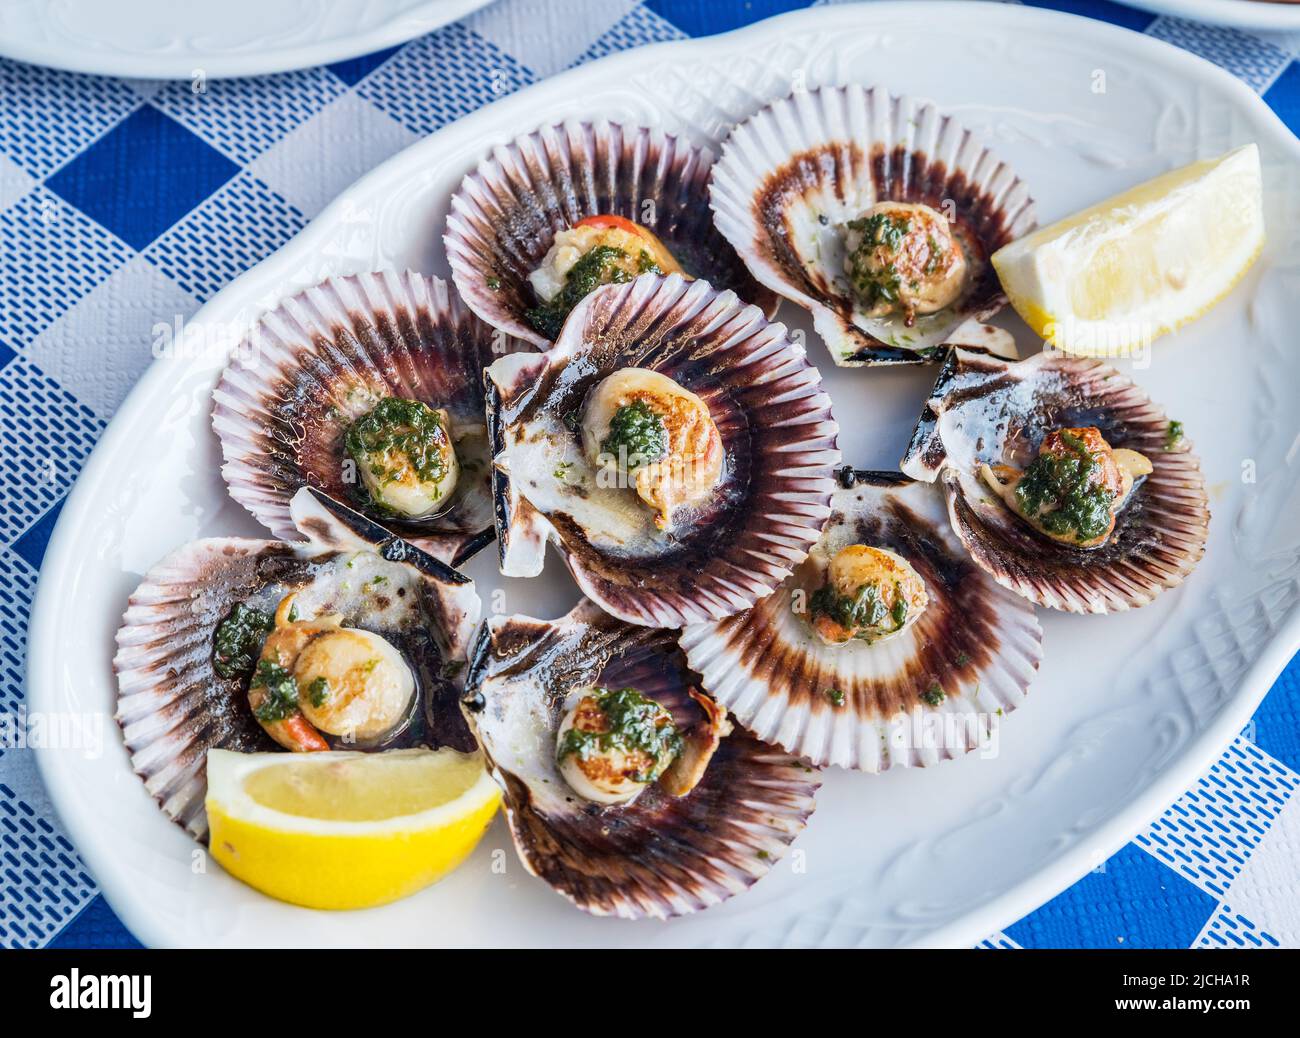 'Lapas' or true limpets with green moyo - traditional seafood of Tenerife and Madeira Islands. Stock Photo